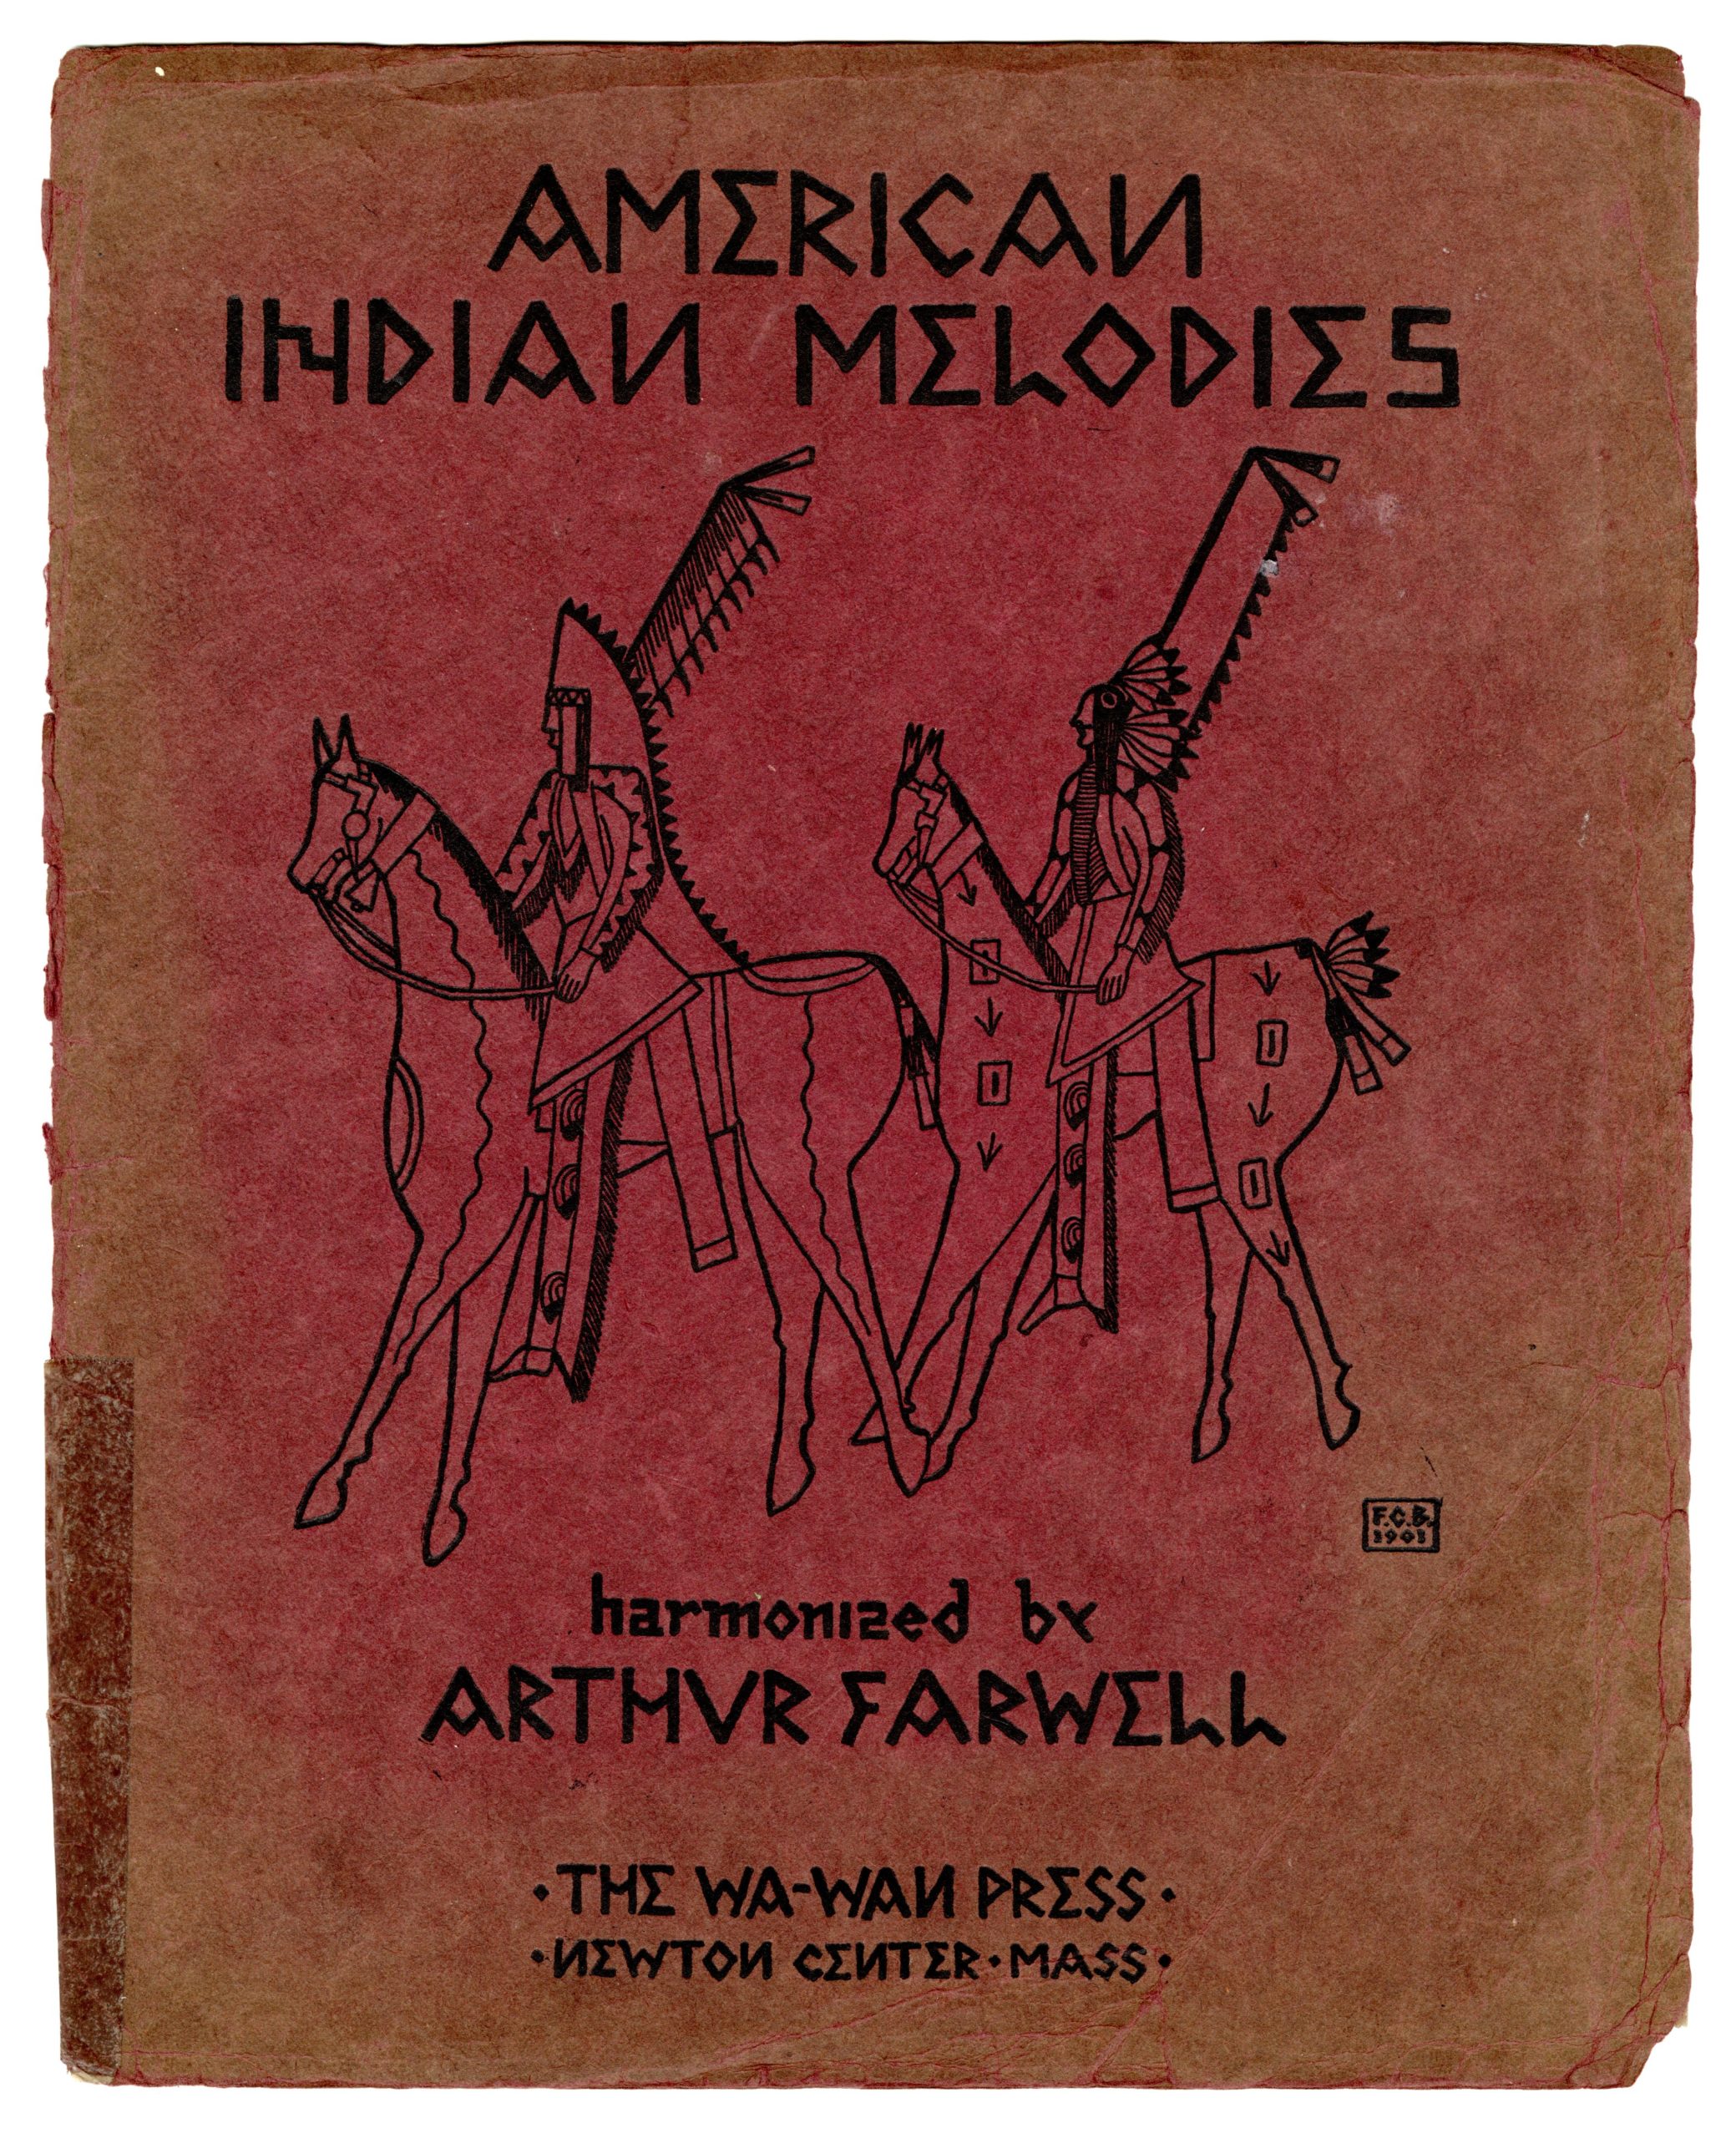 American Indian Melodies, cover of published score.